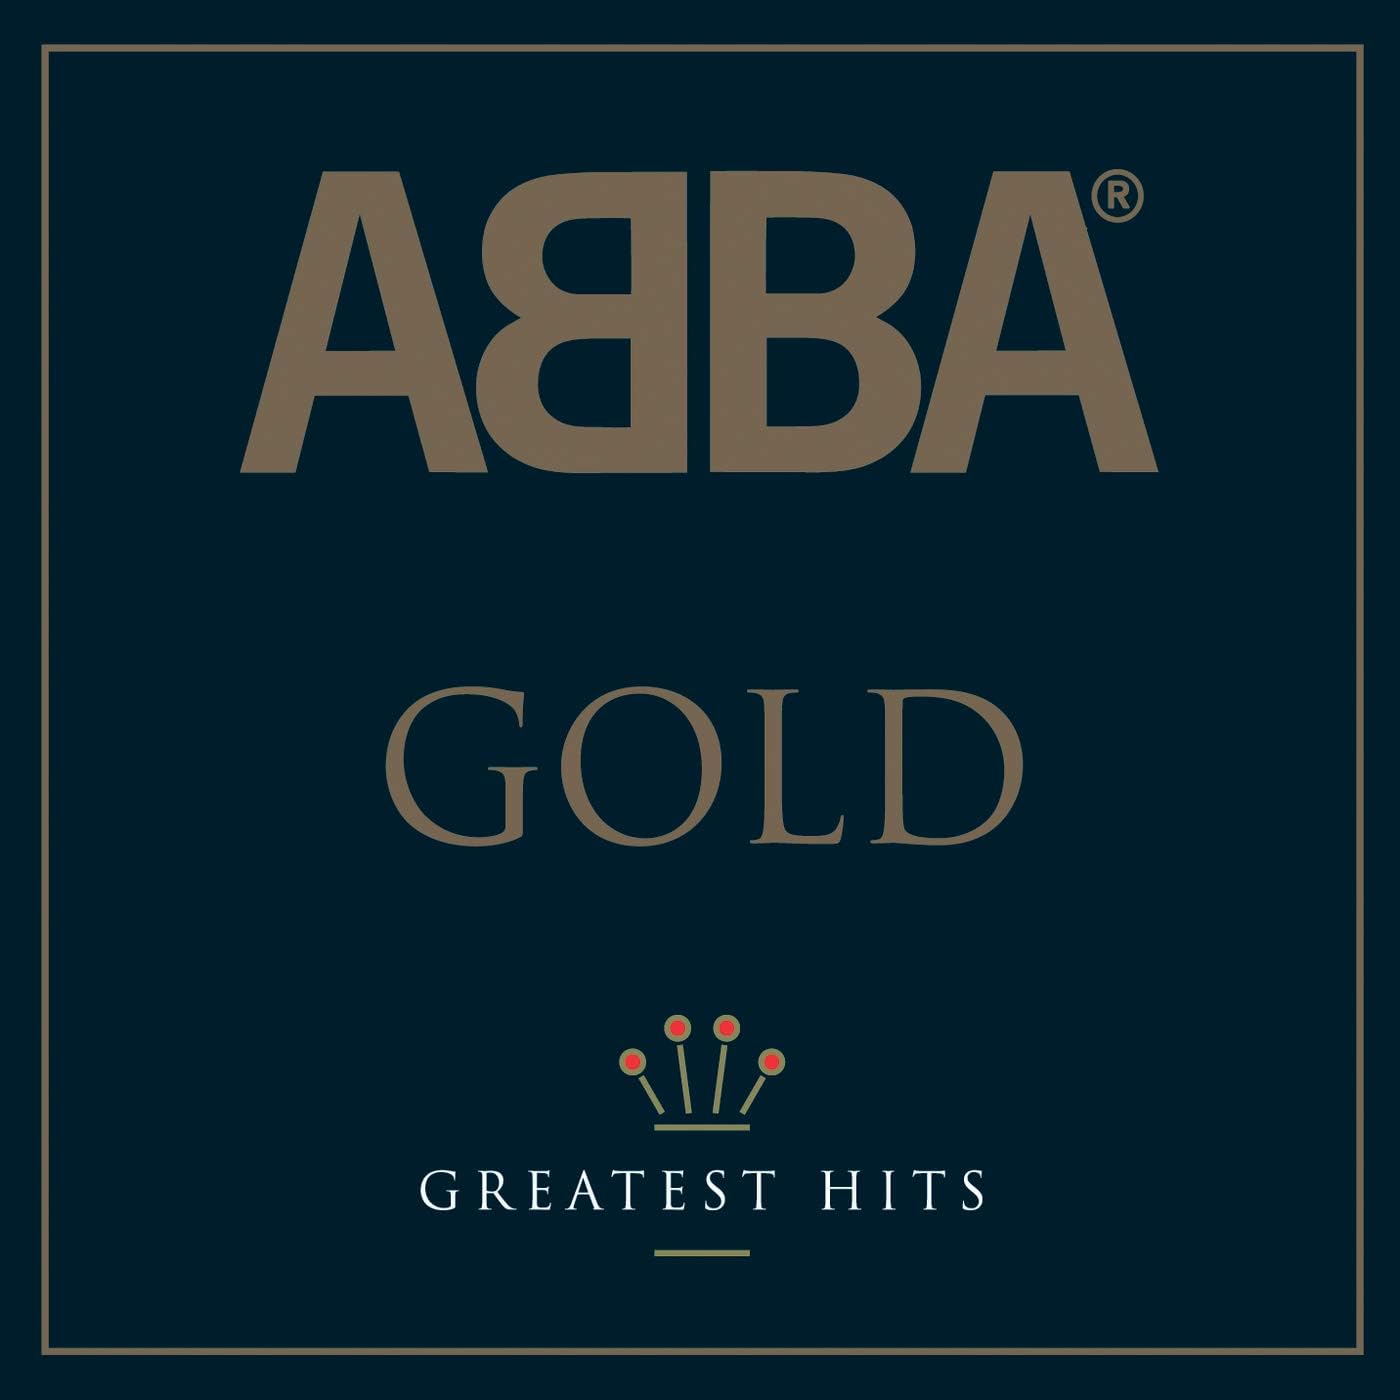 ABBA – Gold Greatest Hits - CD (BLACK COVER)